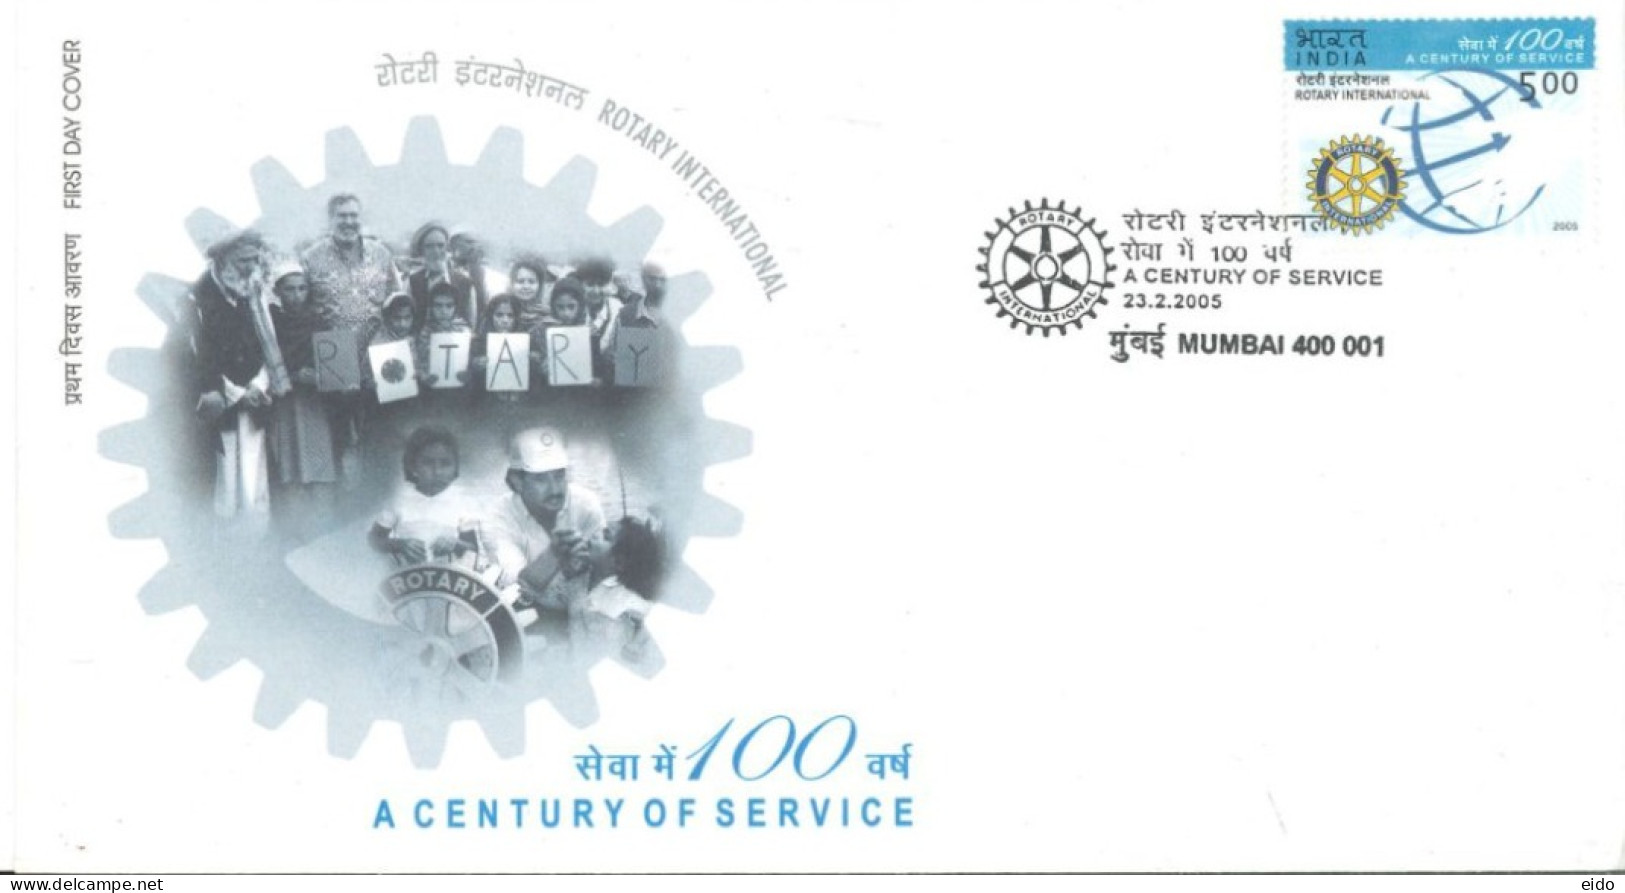 INDIA - 2005 - FDC STAMP OF 100th ANNIVERSARY OF A CENTURY OF SERVICE. - Briefe U. Dokumente